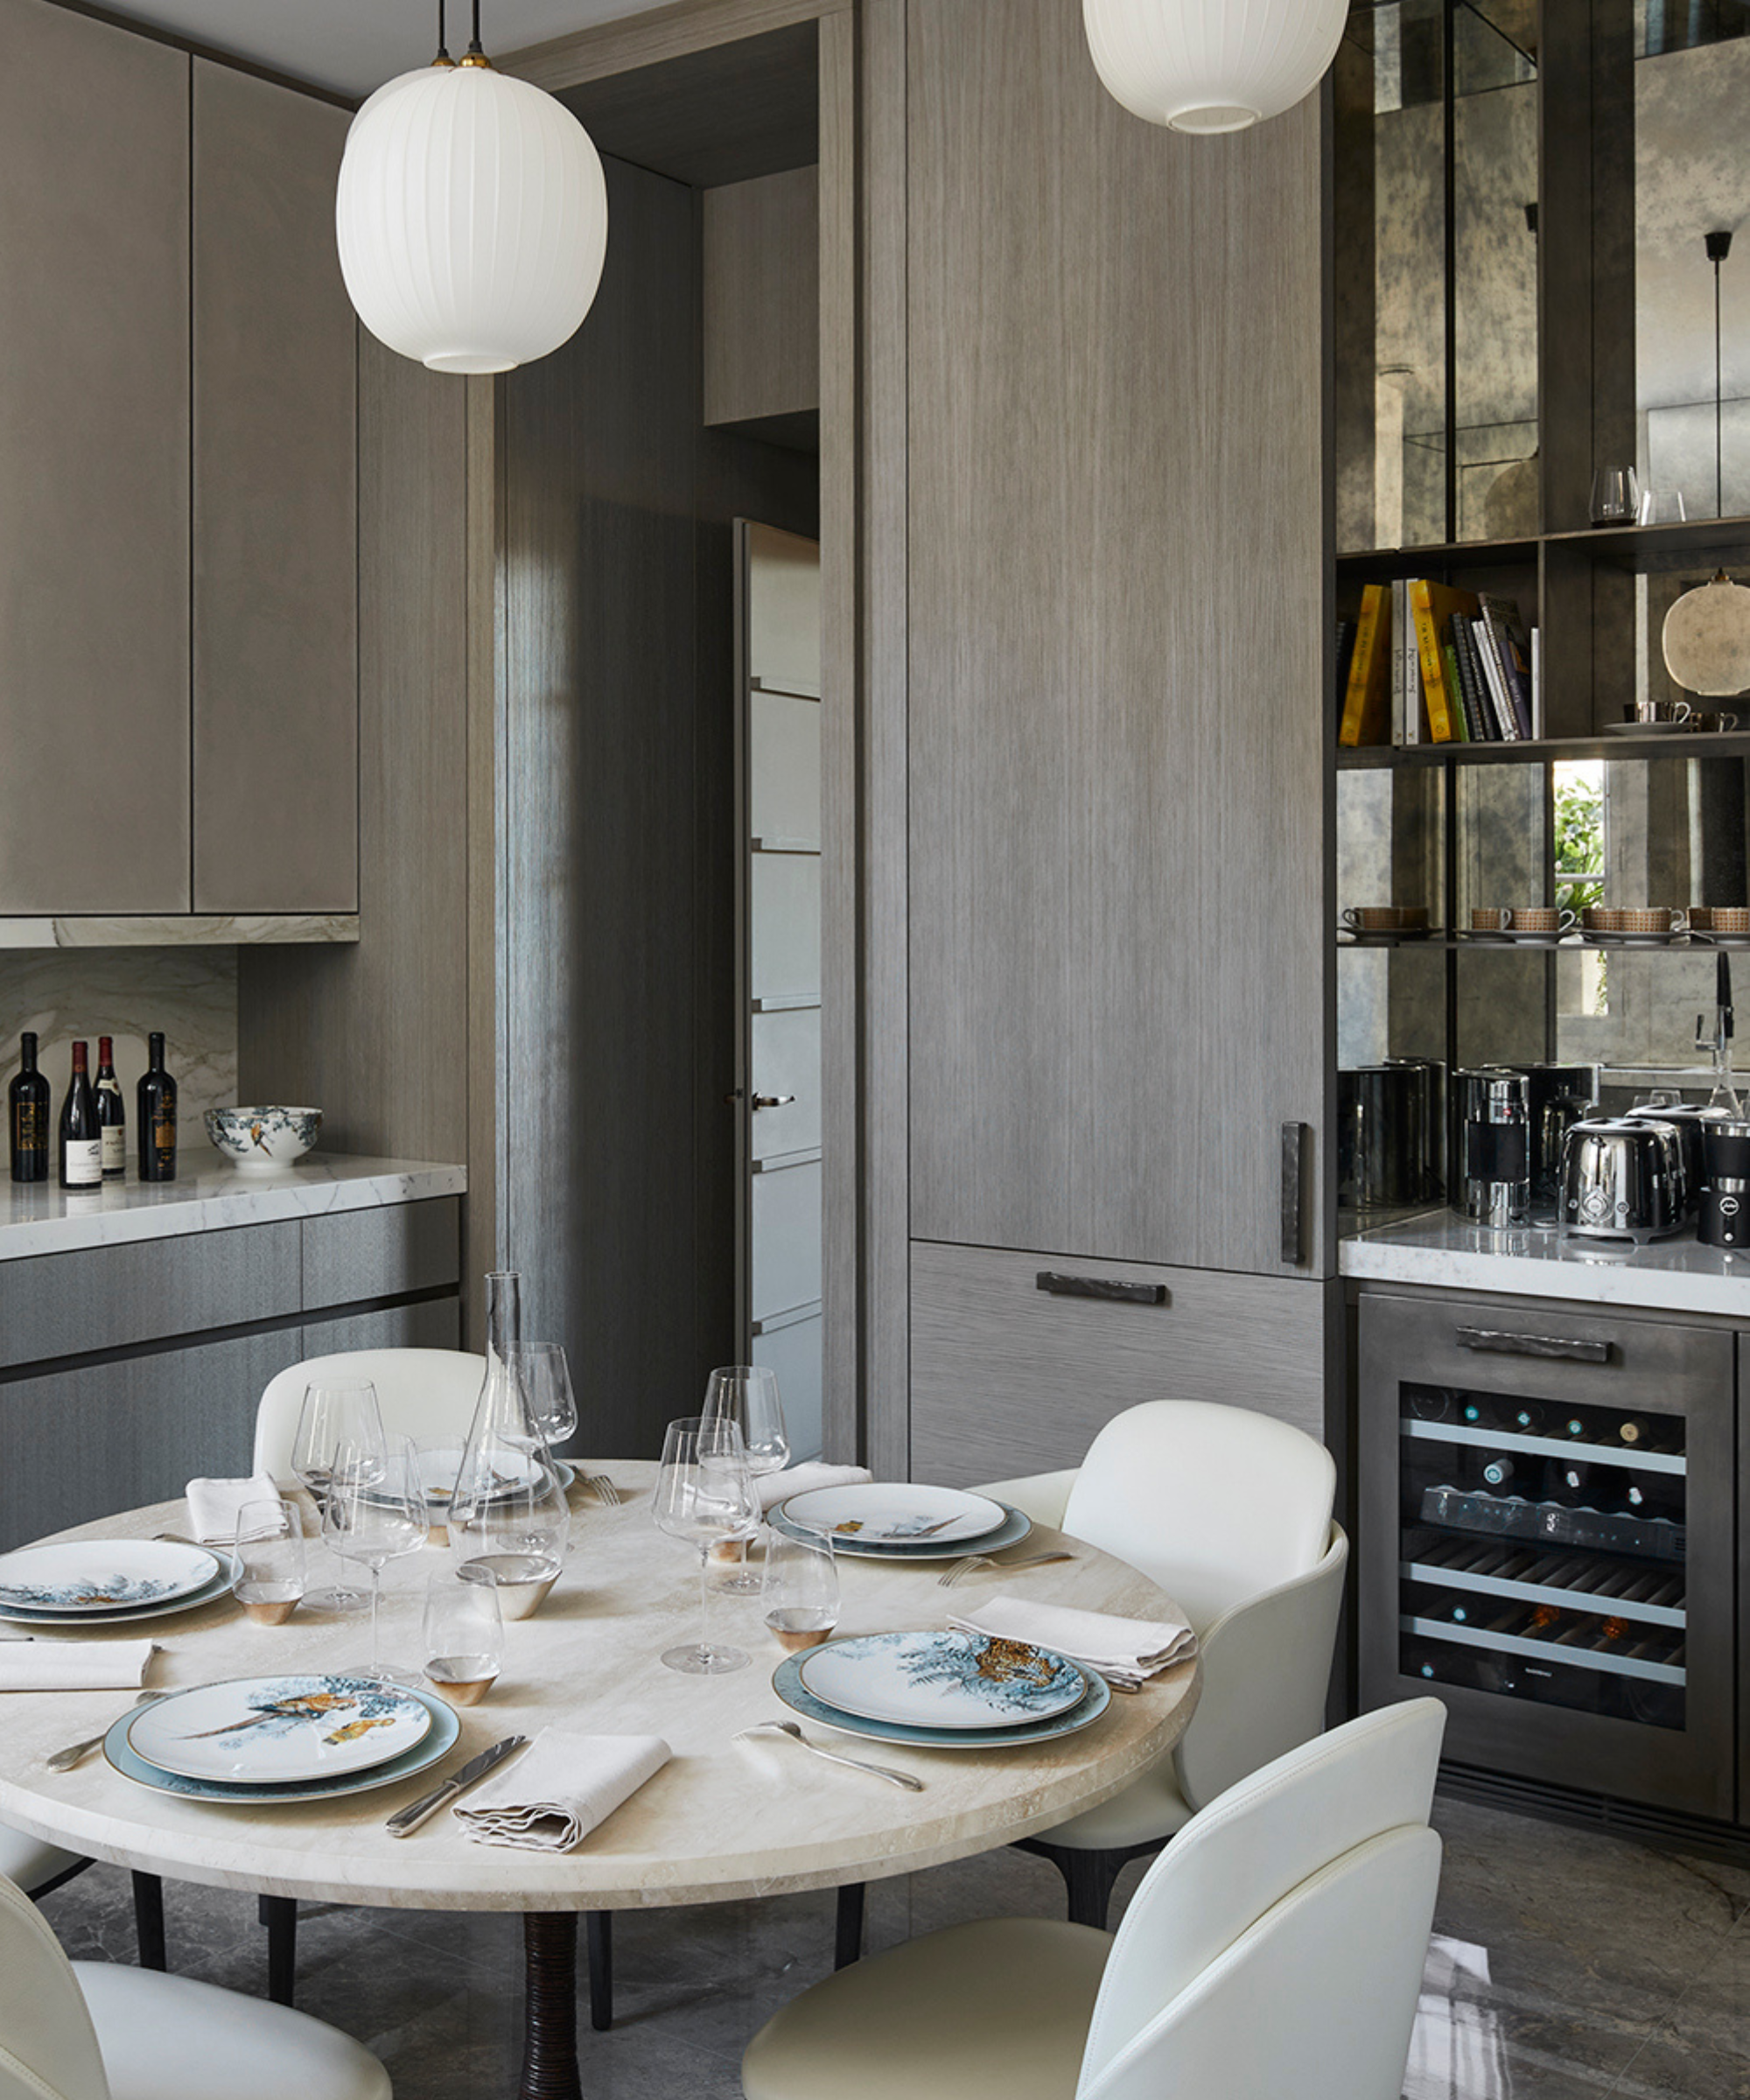 Gray kitchen with large white pendant lighting, mirror detail and central dining table